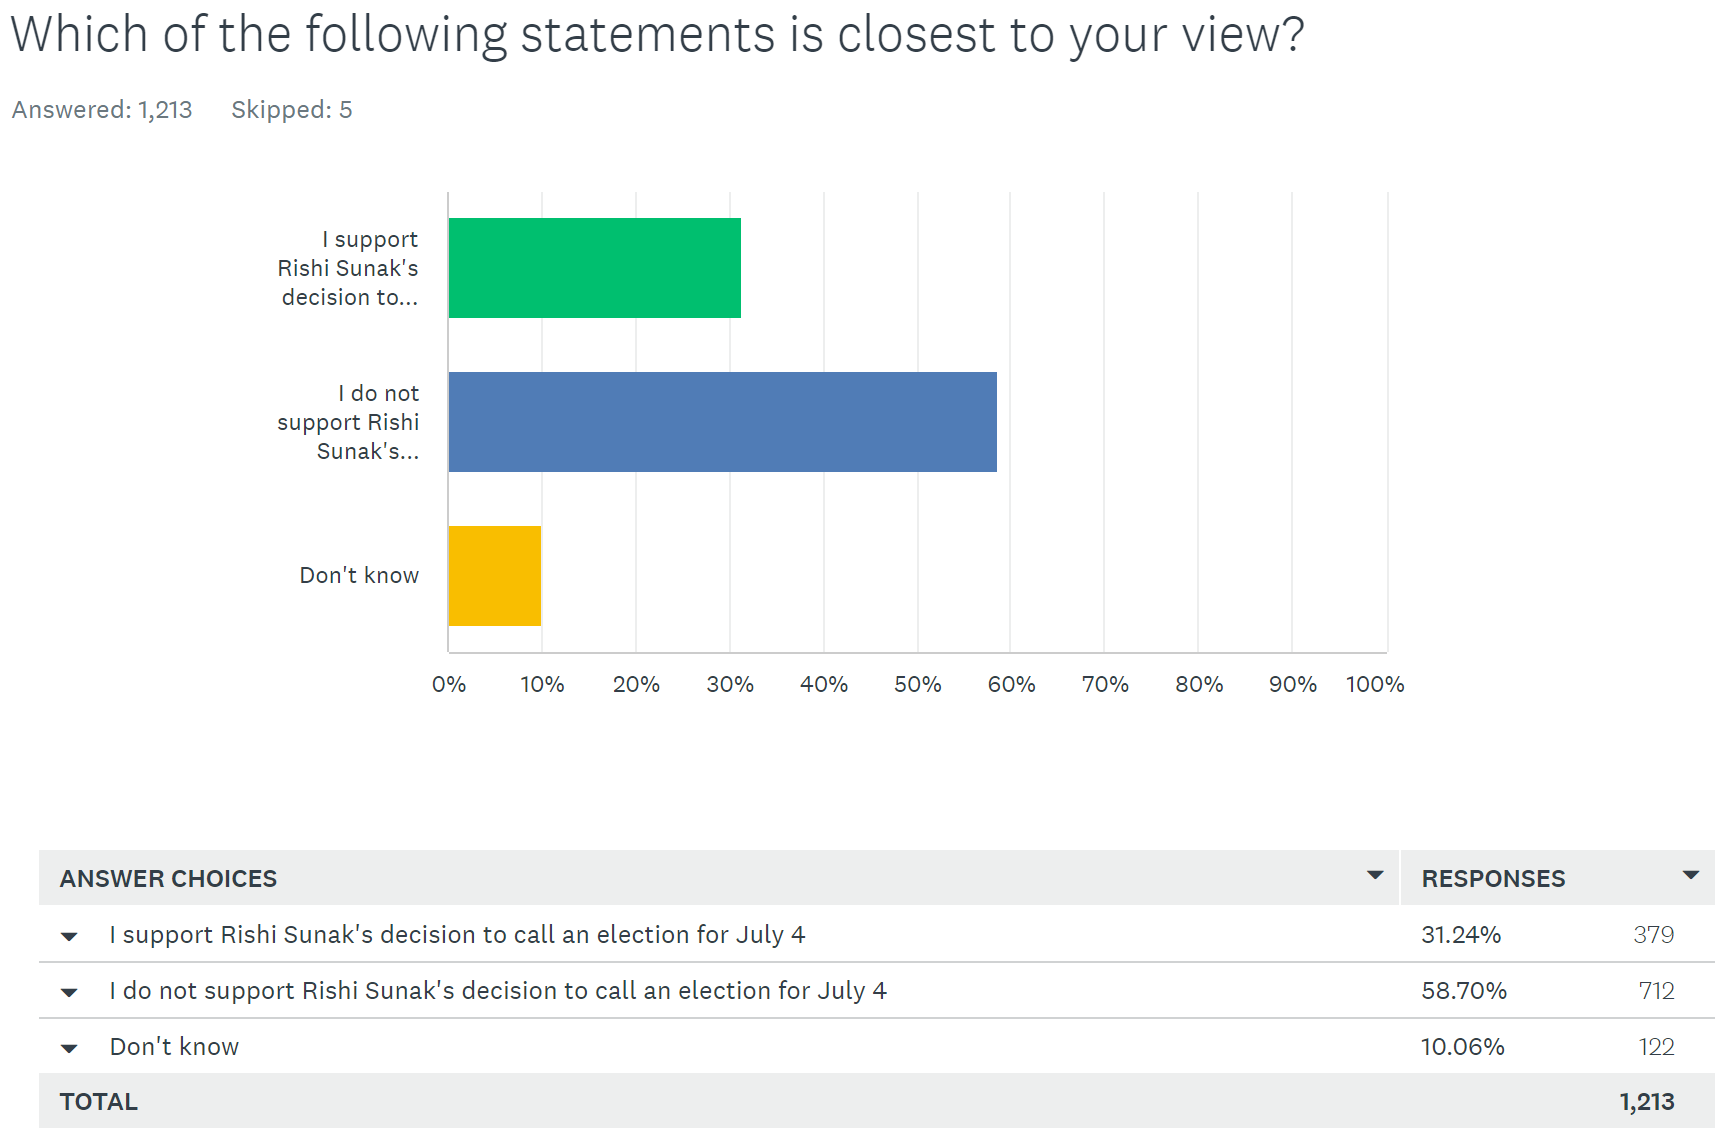 Our survey. A majority of our panel disagree with Sunak’s decision to call the election for July 4th.